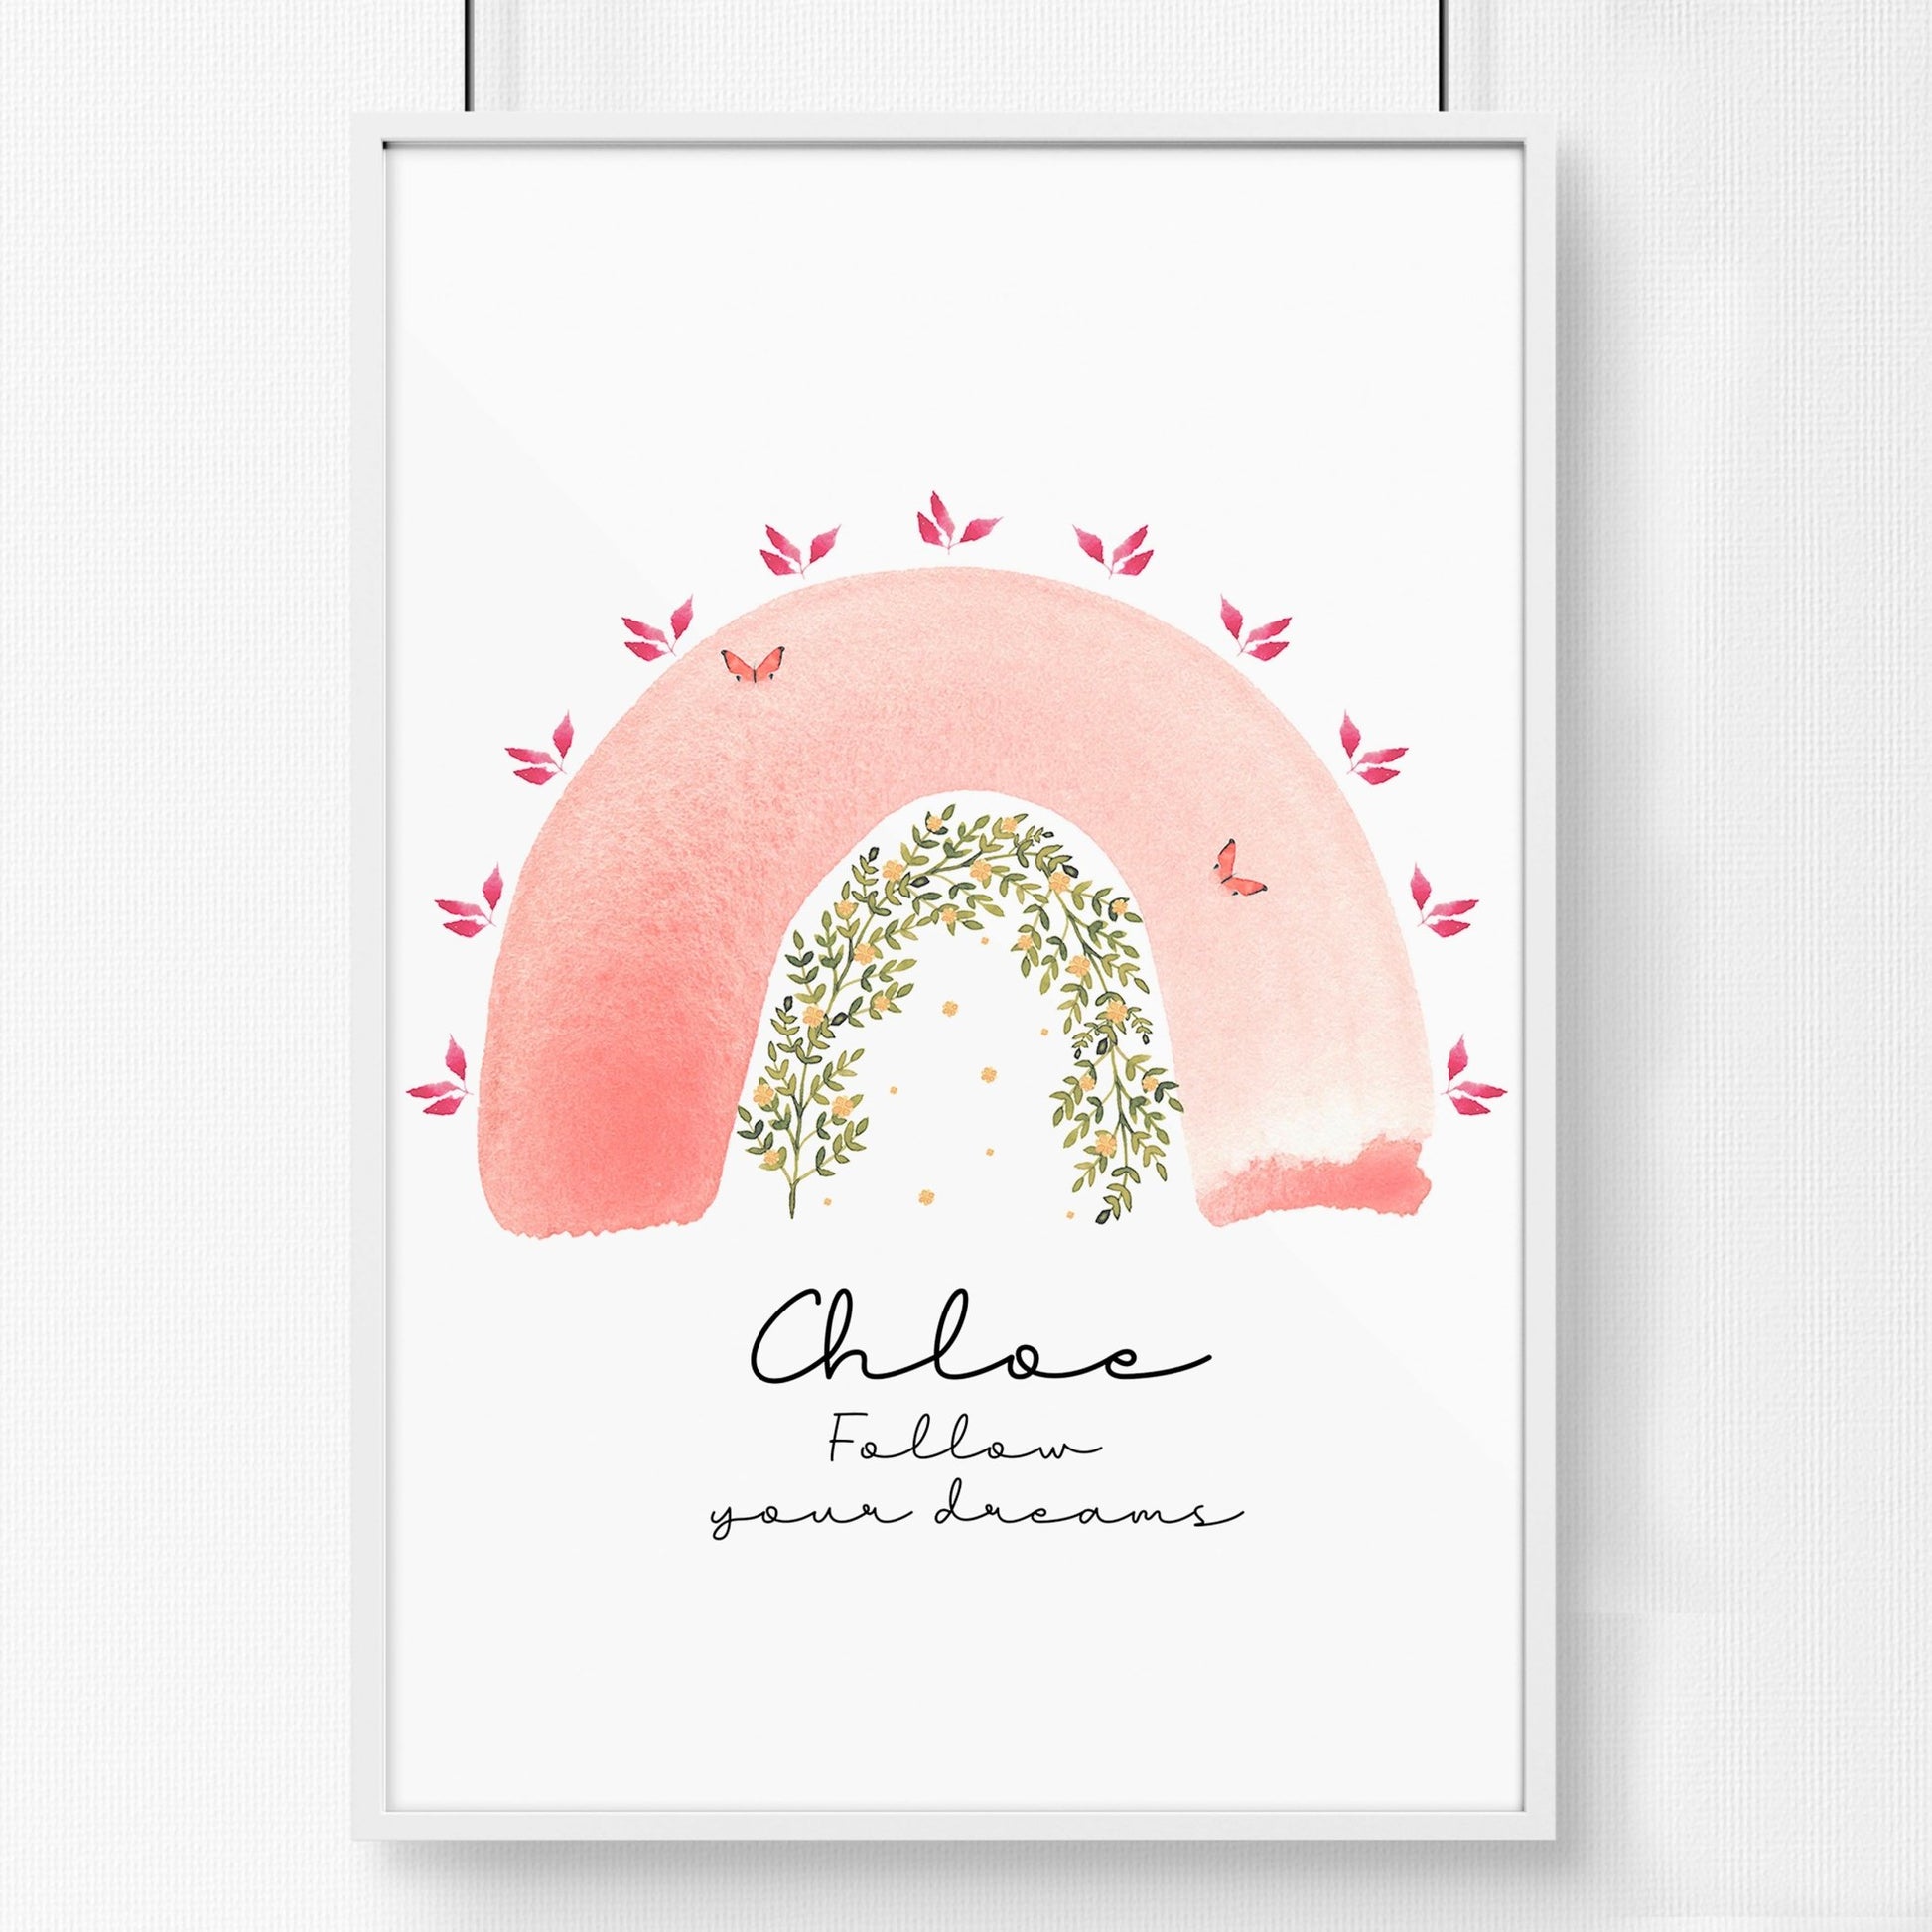 Rainbow prints for Girls' room | wall art print - About Wall Art